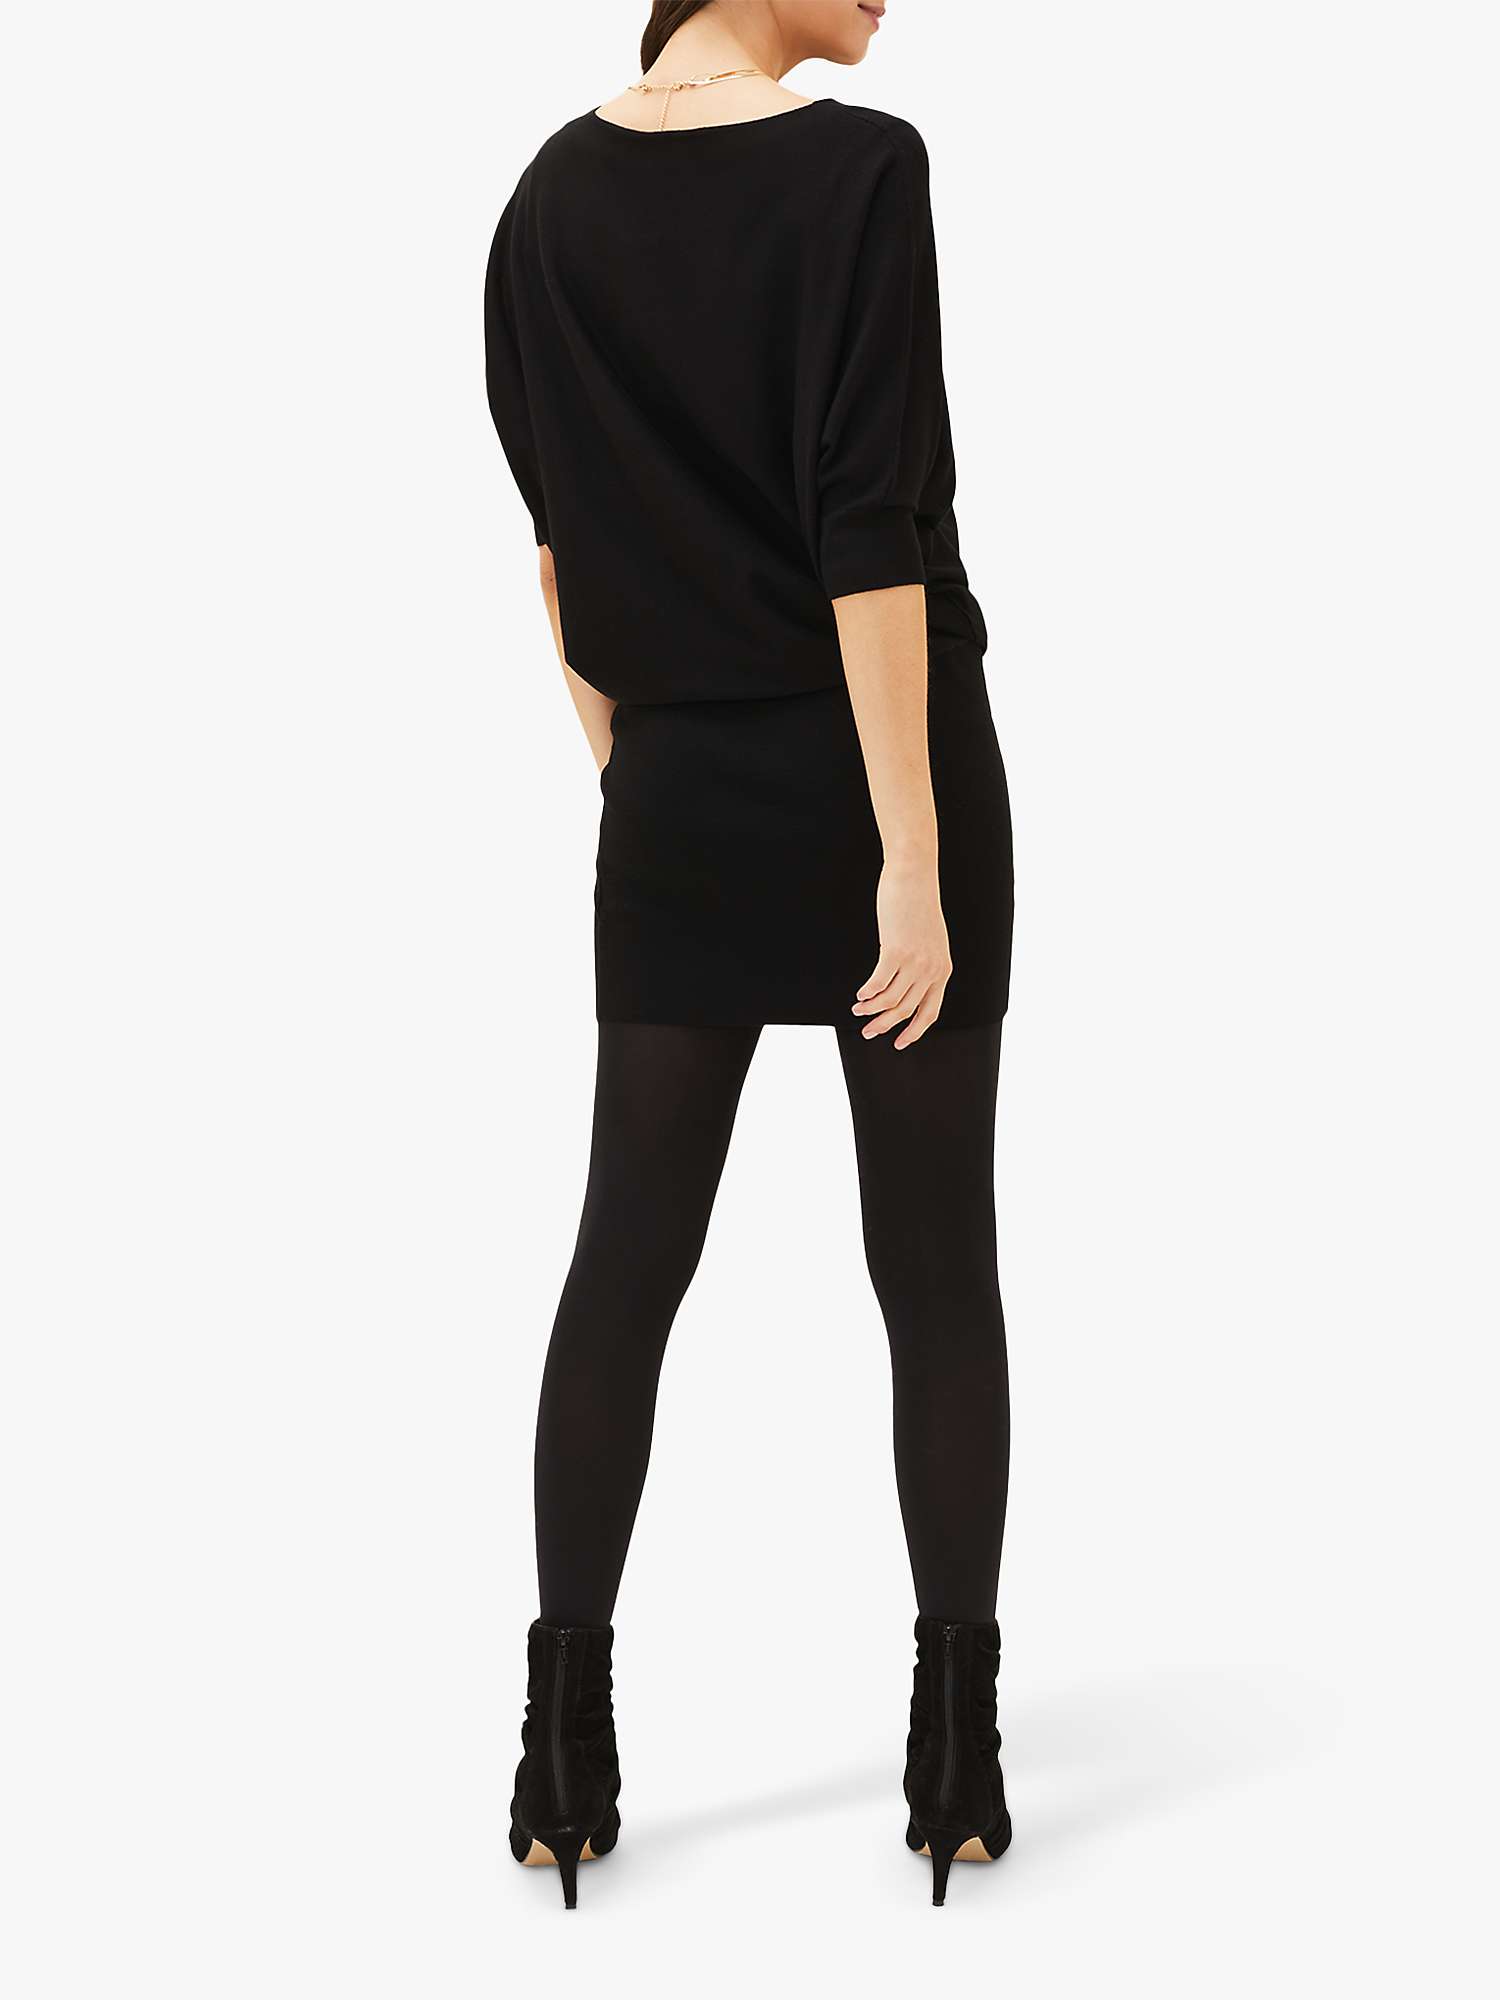 Buy Phase Eight Becca Batwing Knitted Dress Online at johnlewis.com